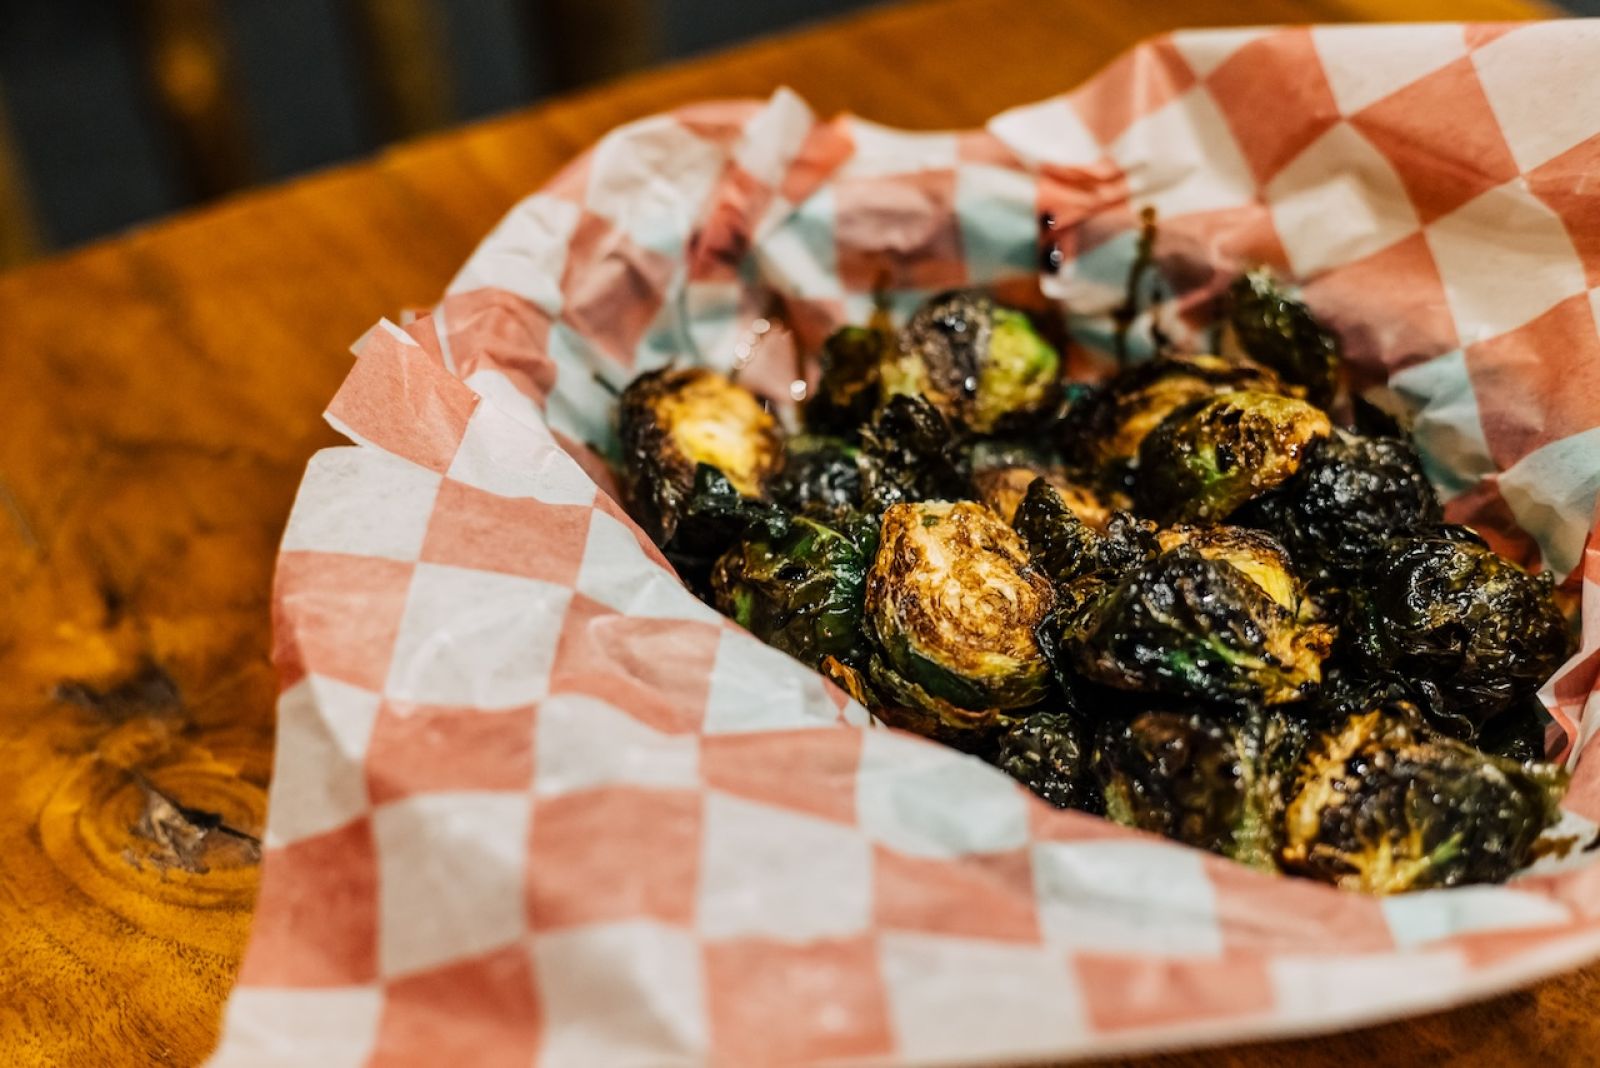 Brussels Sprouts Appetizer at the Crazy Horse Bar and Grill